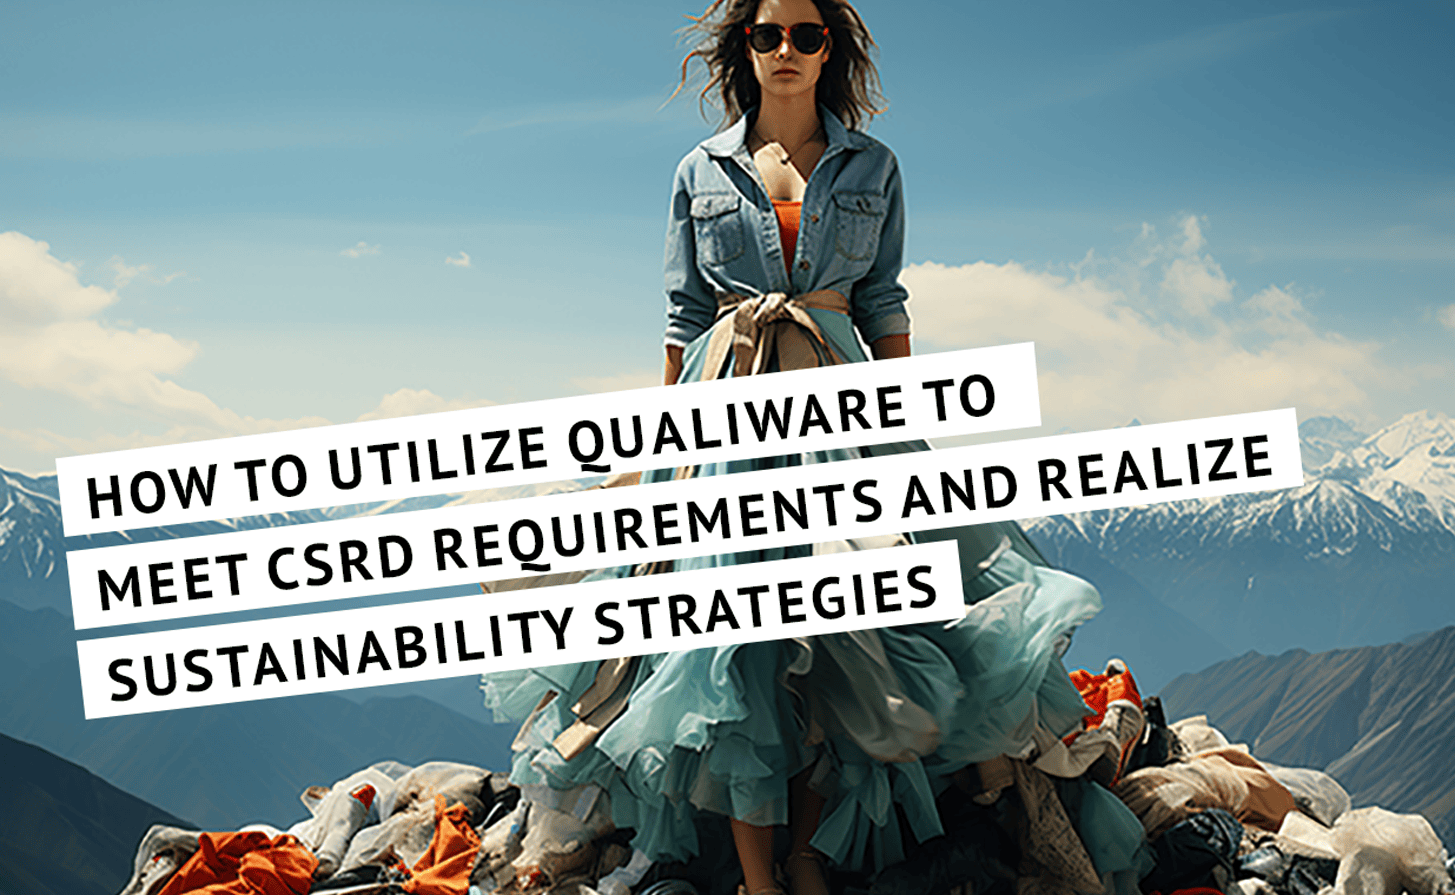 Utilize QualiWare to Meet CSRD requirements and realize sustainability strategies